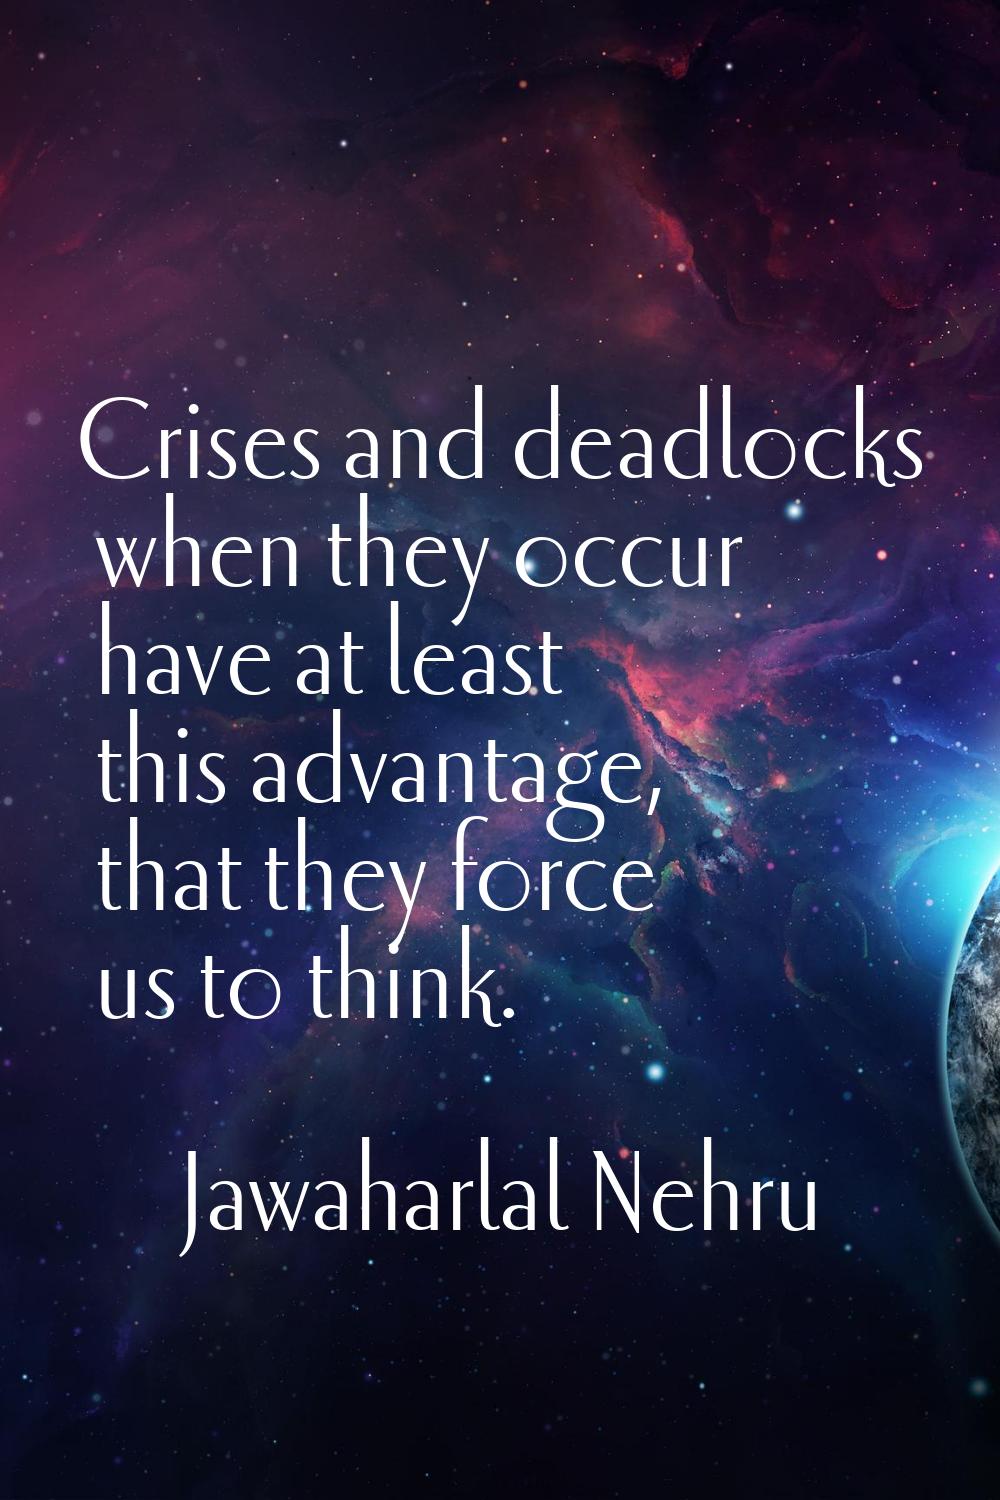 Crises and deadlocks when they occur have at least this advantage, that they force us to think.